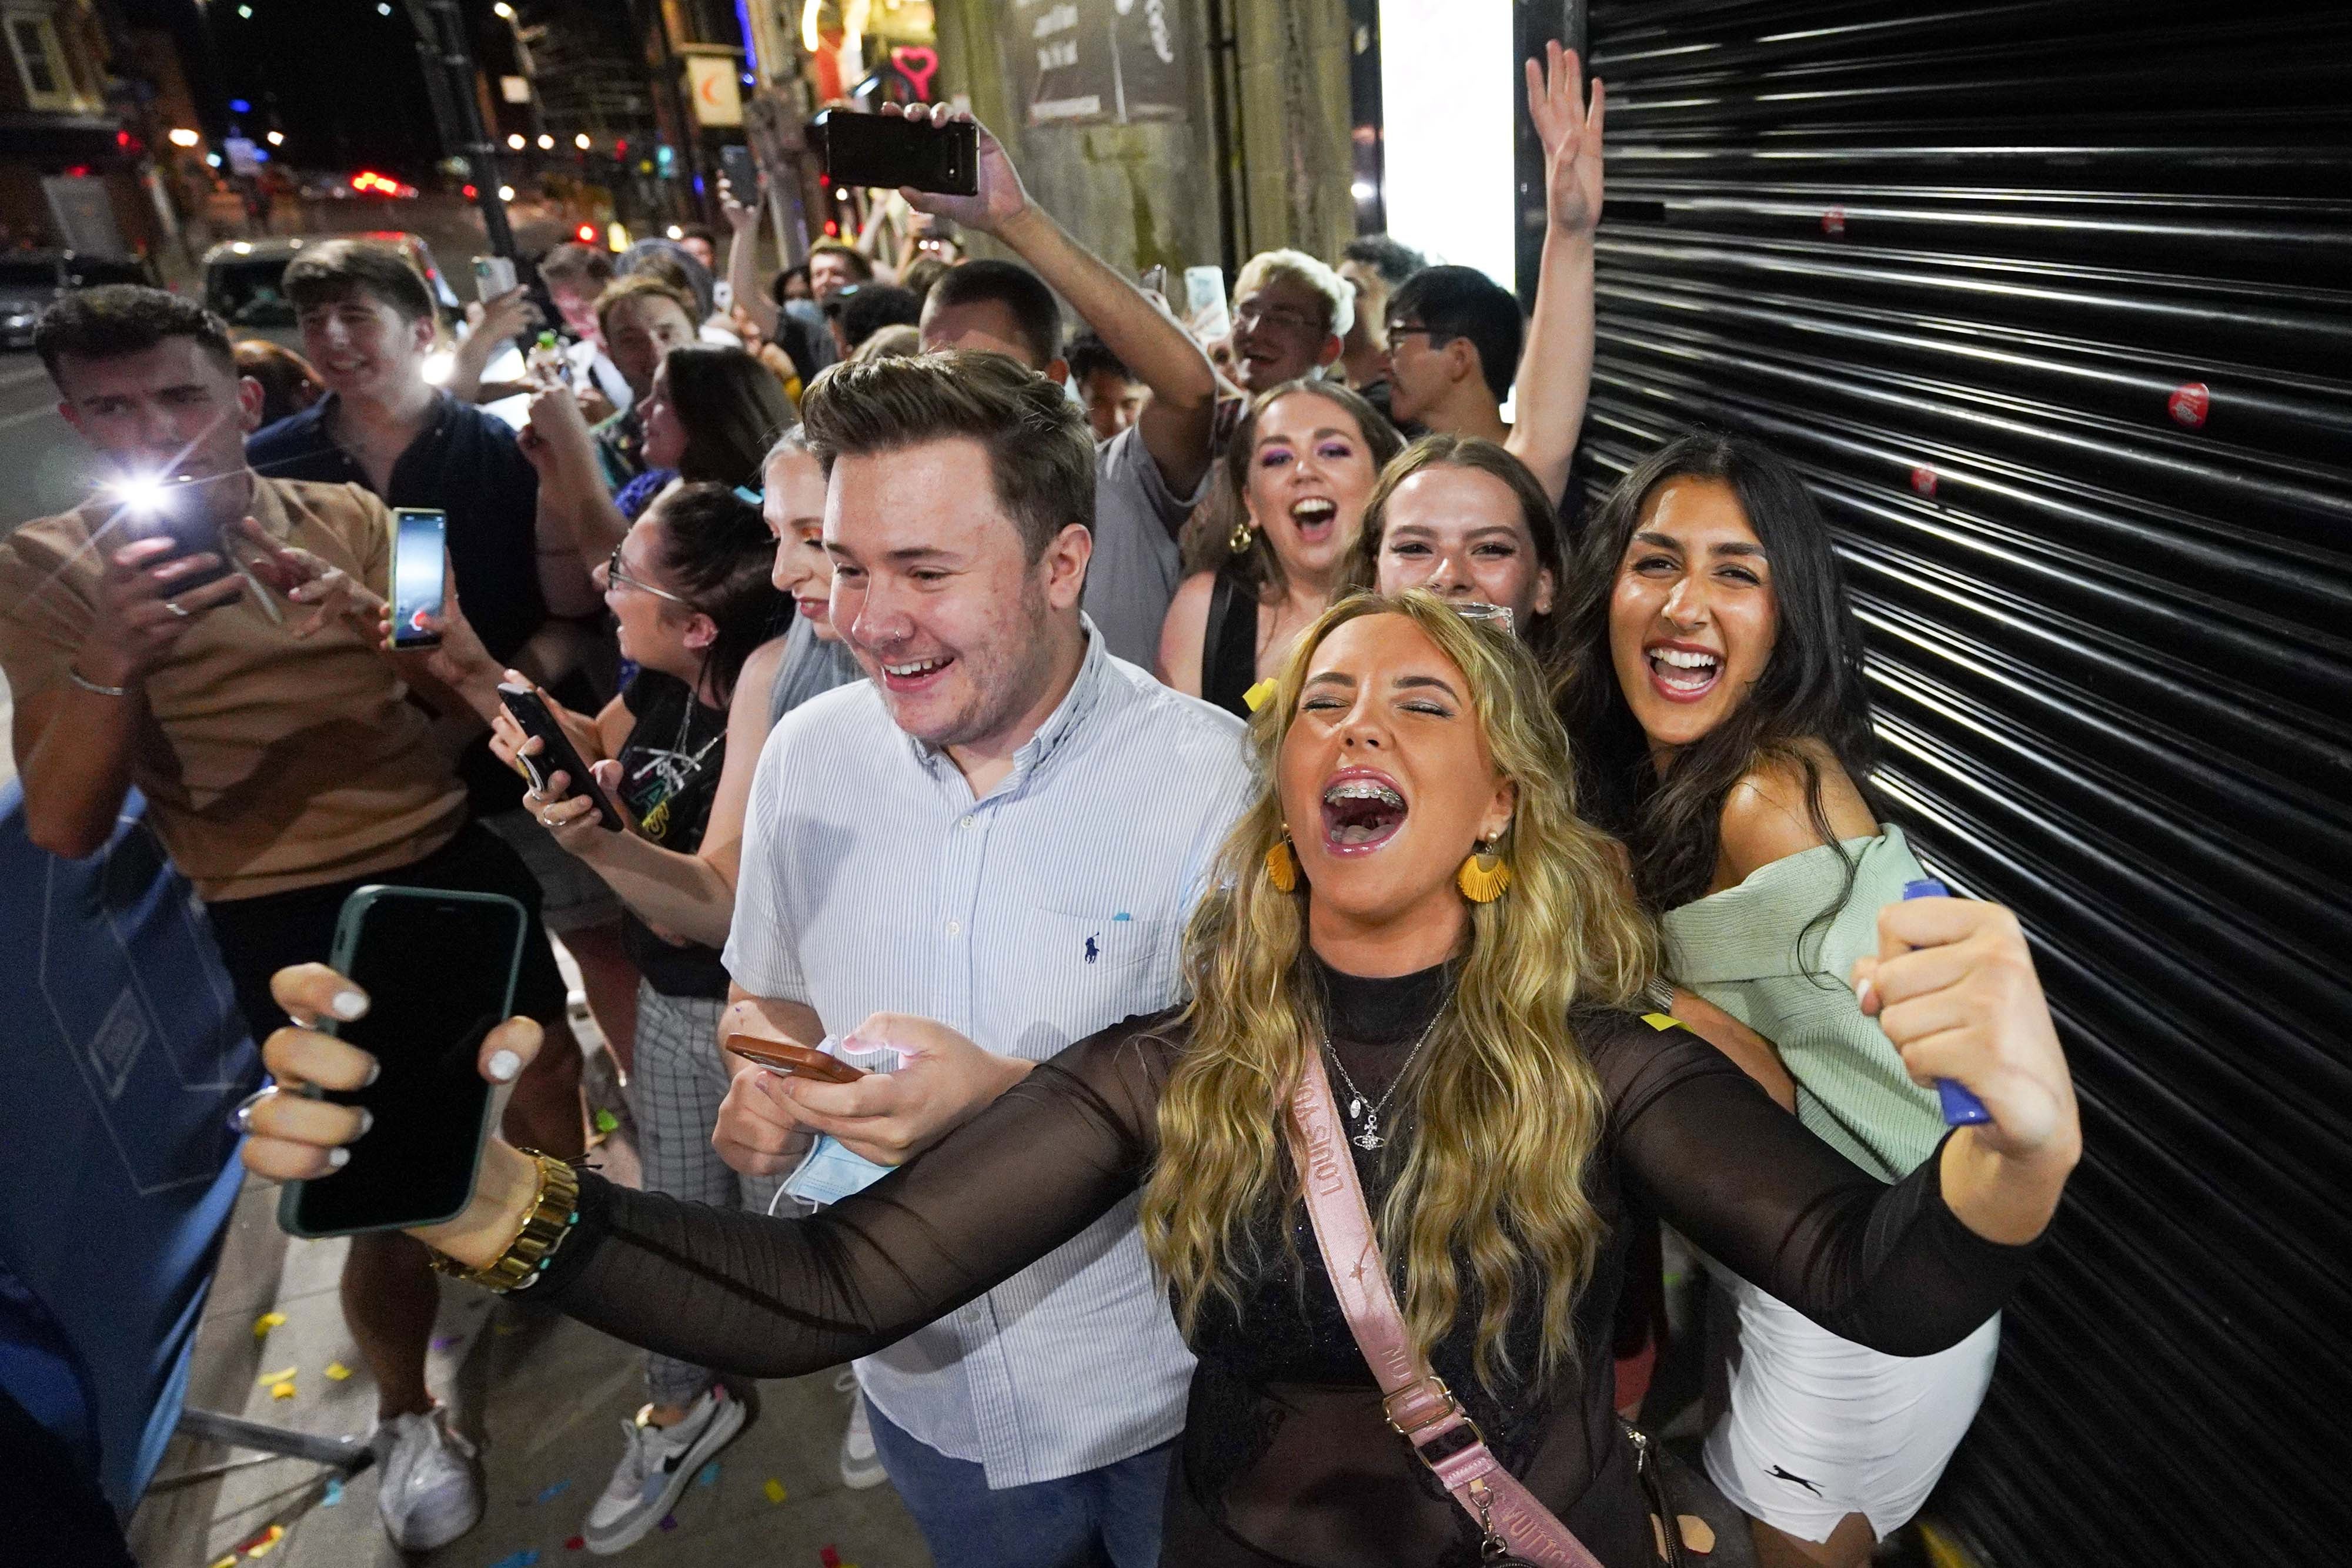 Nightclub revellers were unable to contain their glee as the final restrictions were lifted (Ioannis Alexopoulos/PA)